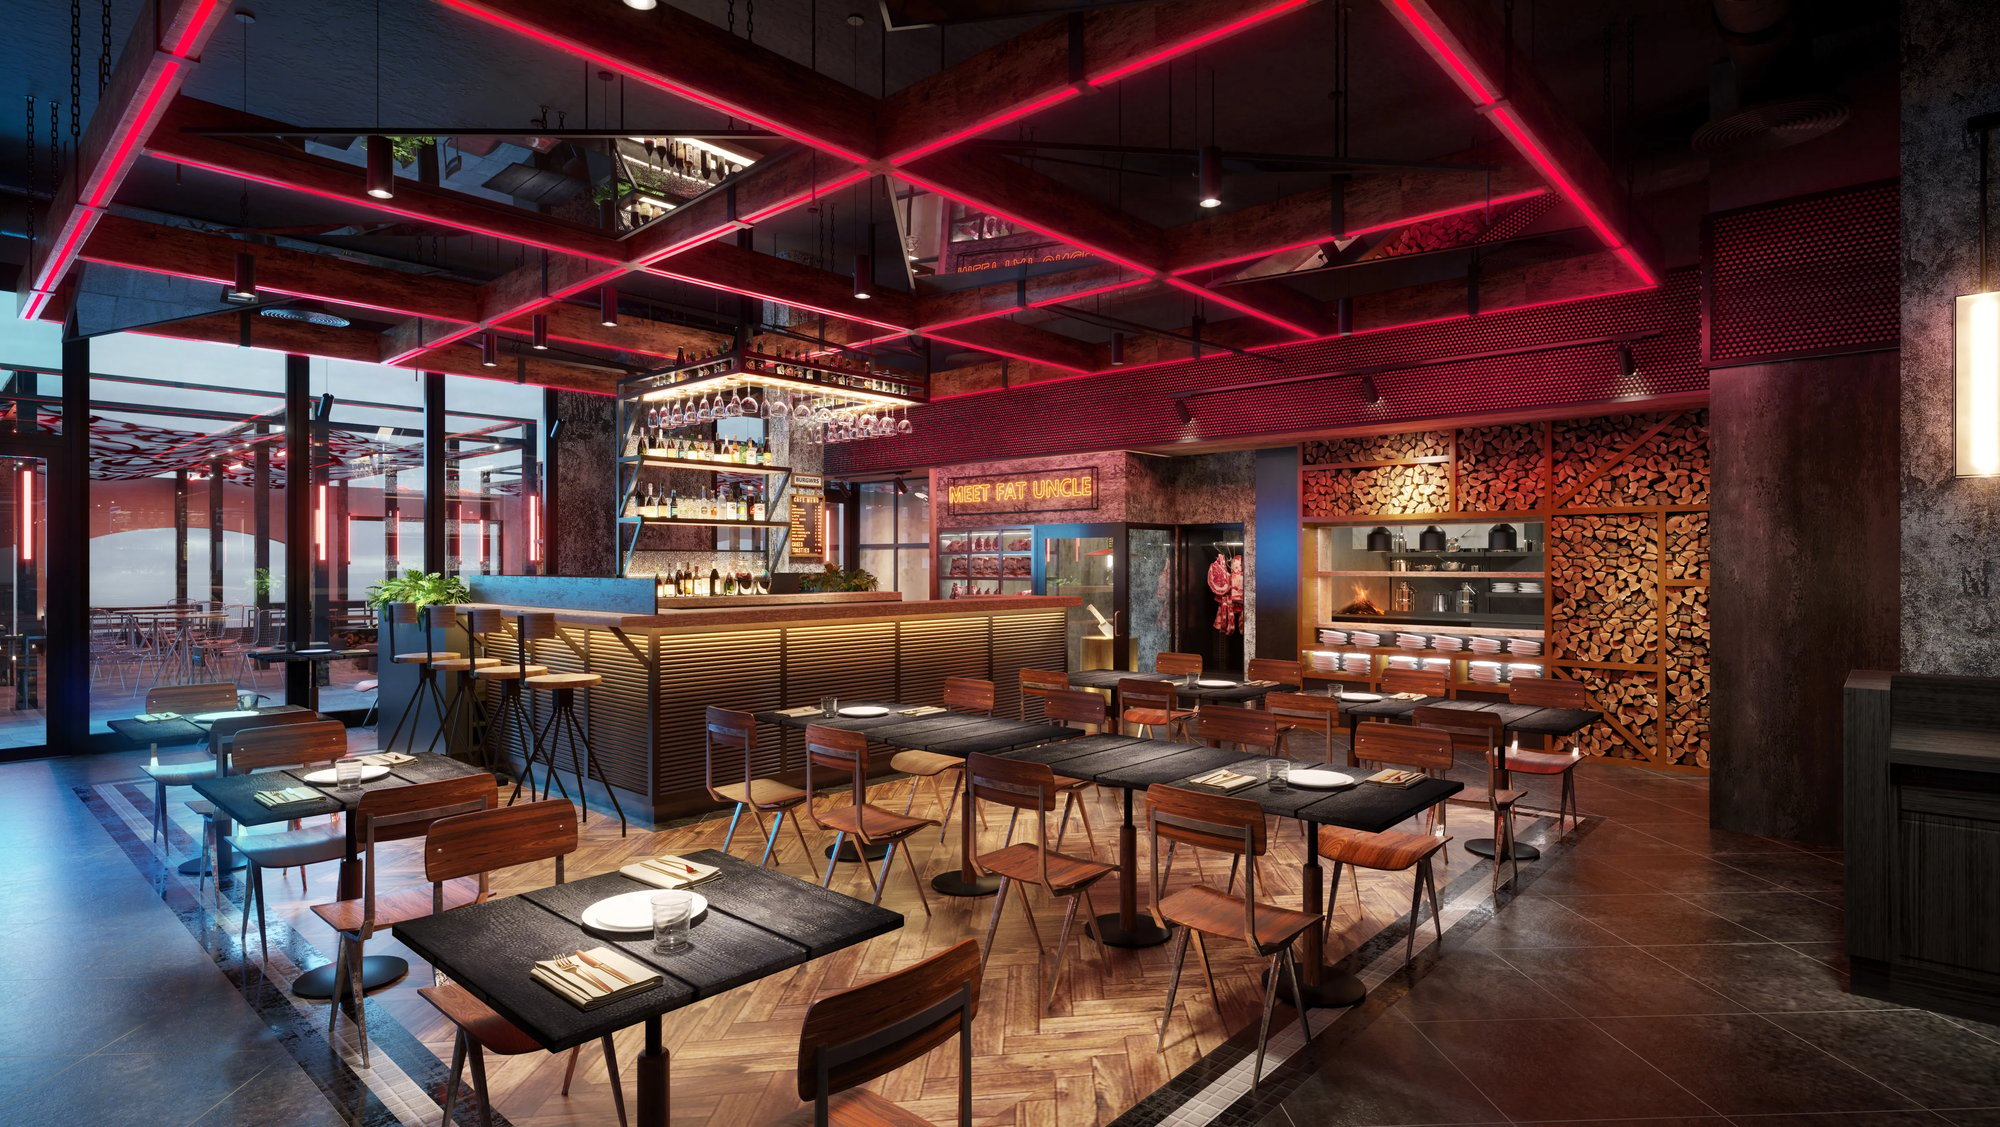 Fat Uncle Instagrammable beautiful foods and drinks, red led ceiling, restuarant, concept interior design cgi